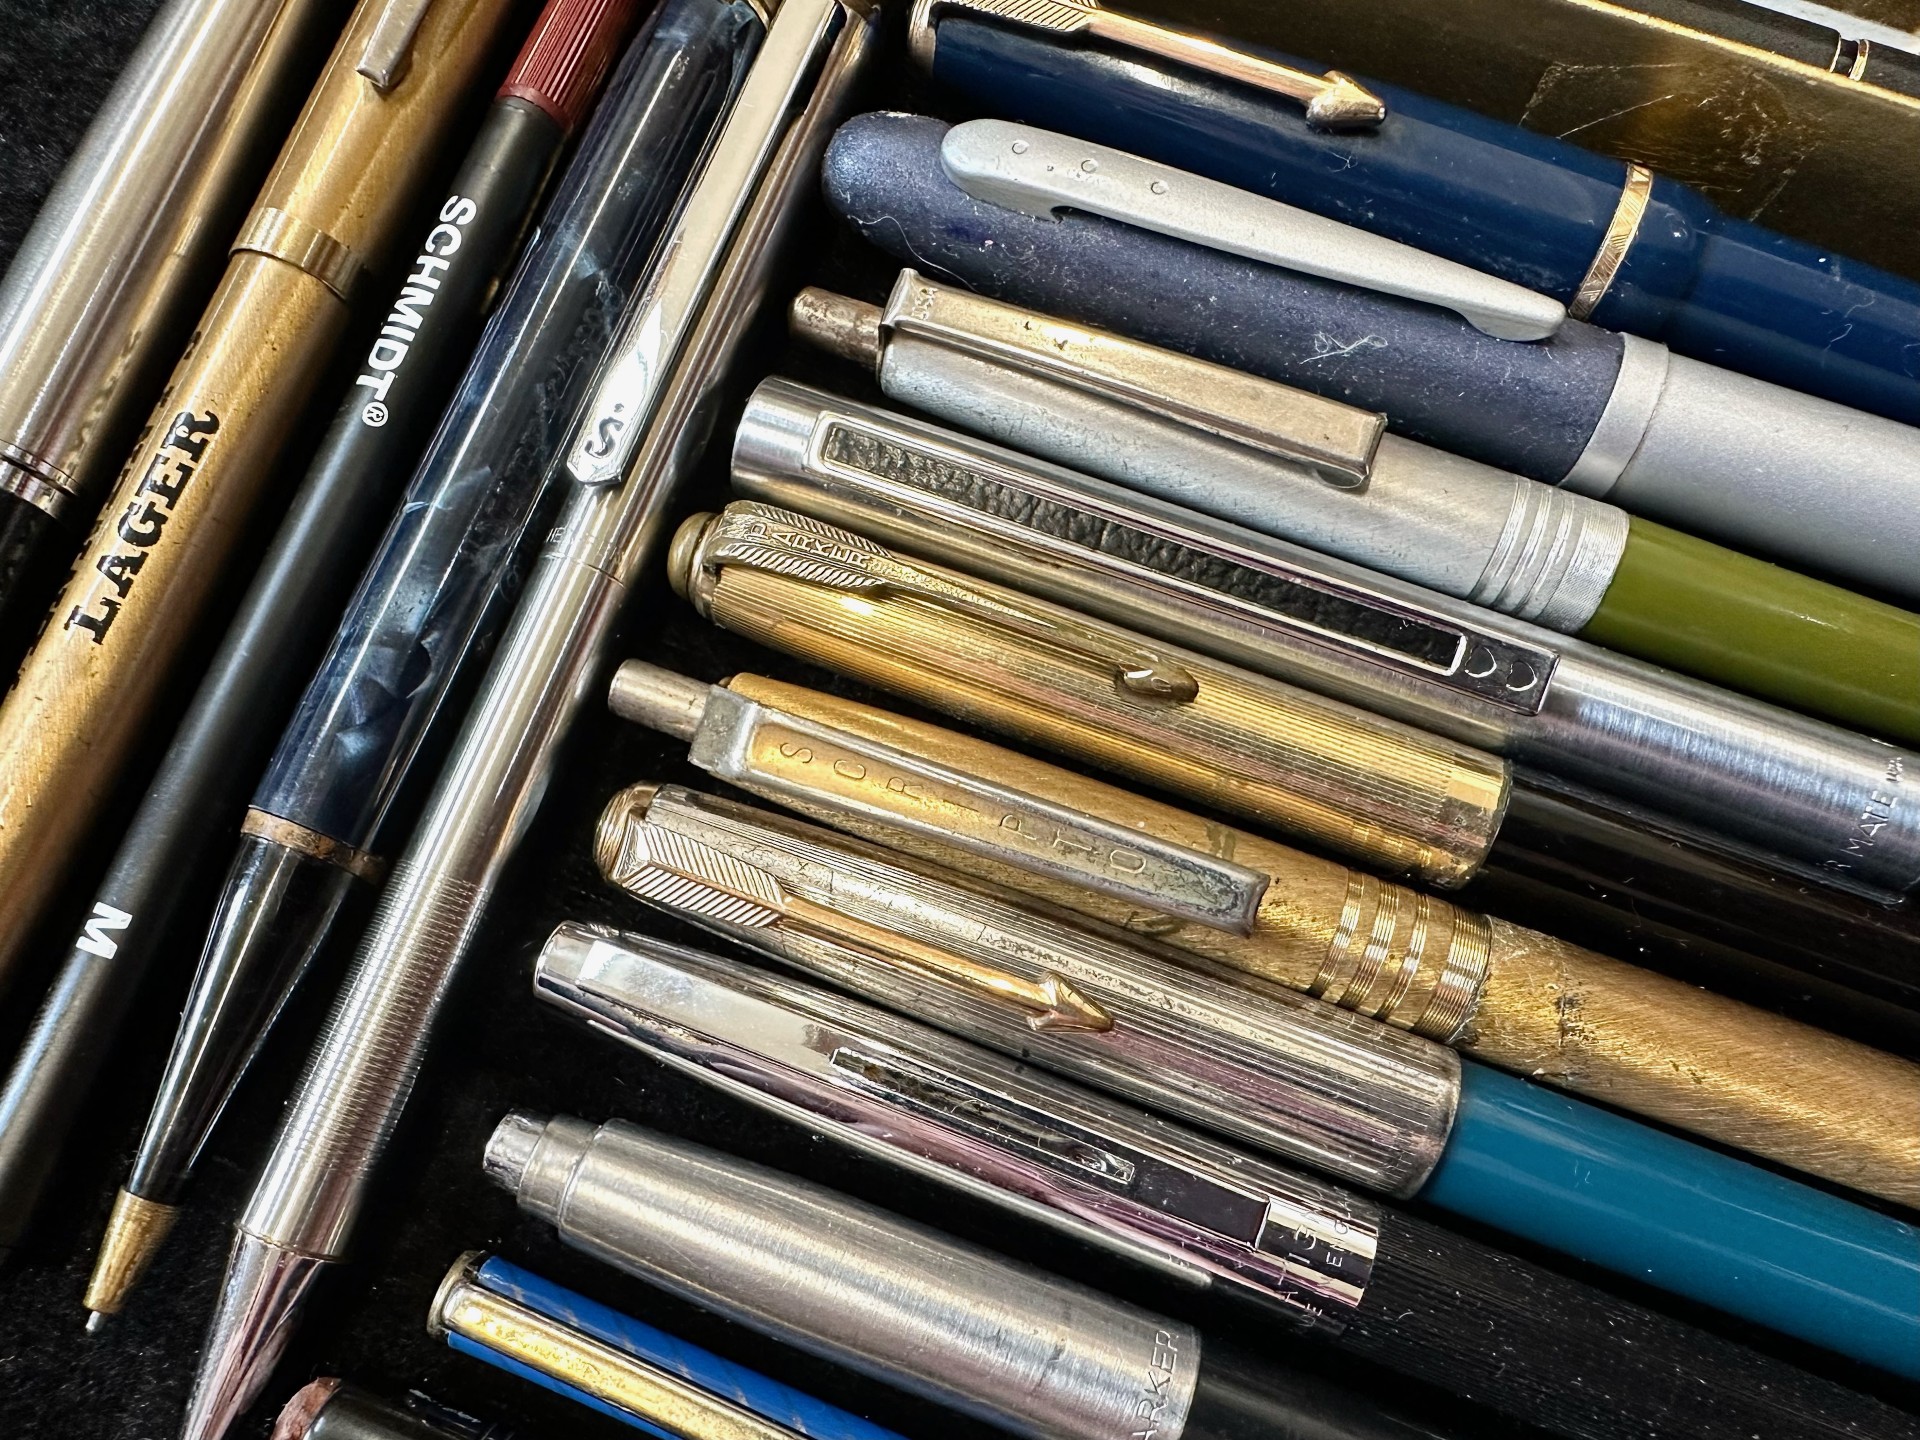 Collection of Vintage Fountain & Ballpoint Pens, including a Cross black fountain pen in original - Image 2 of 3